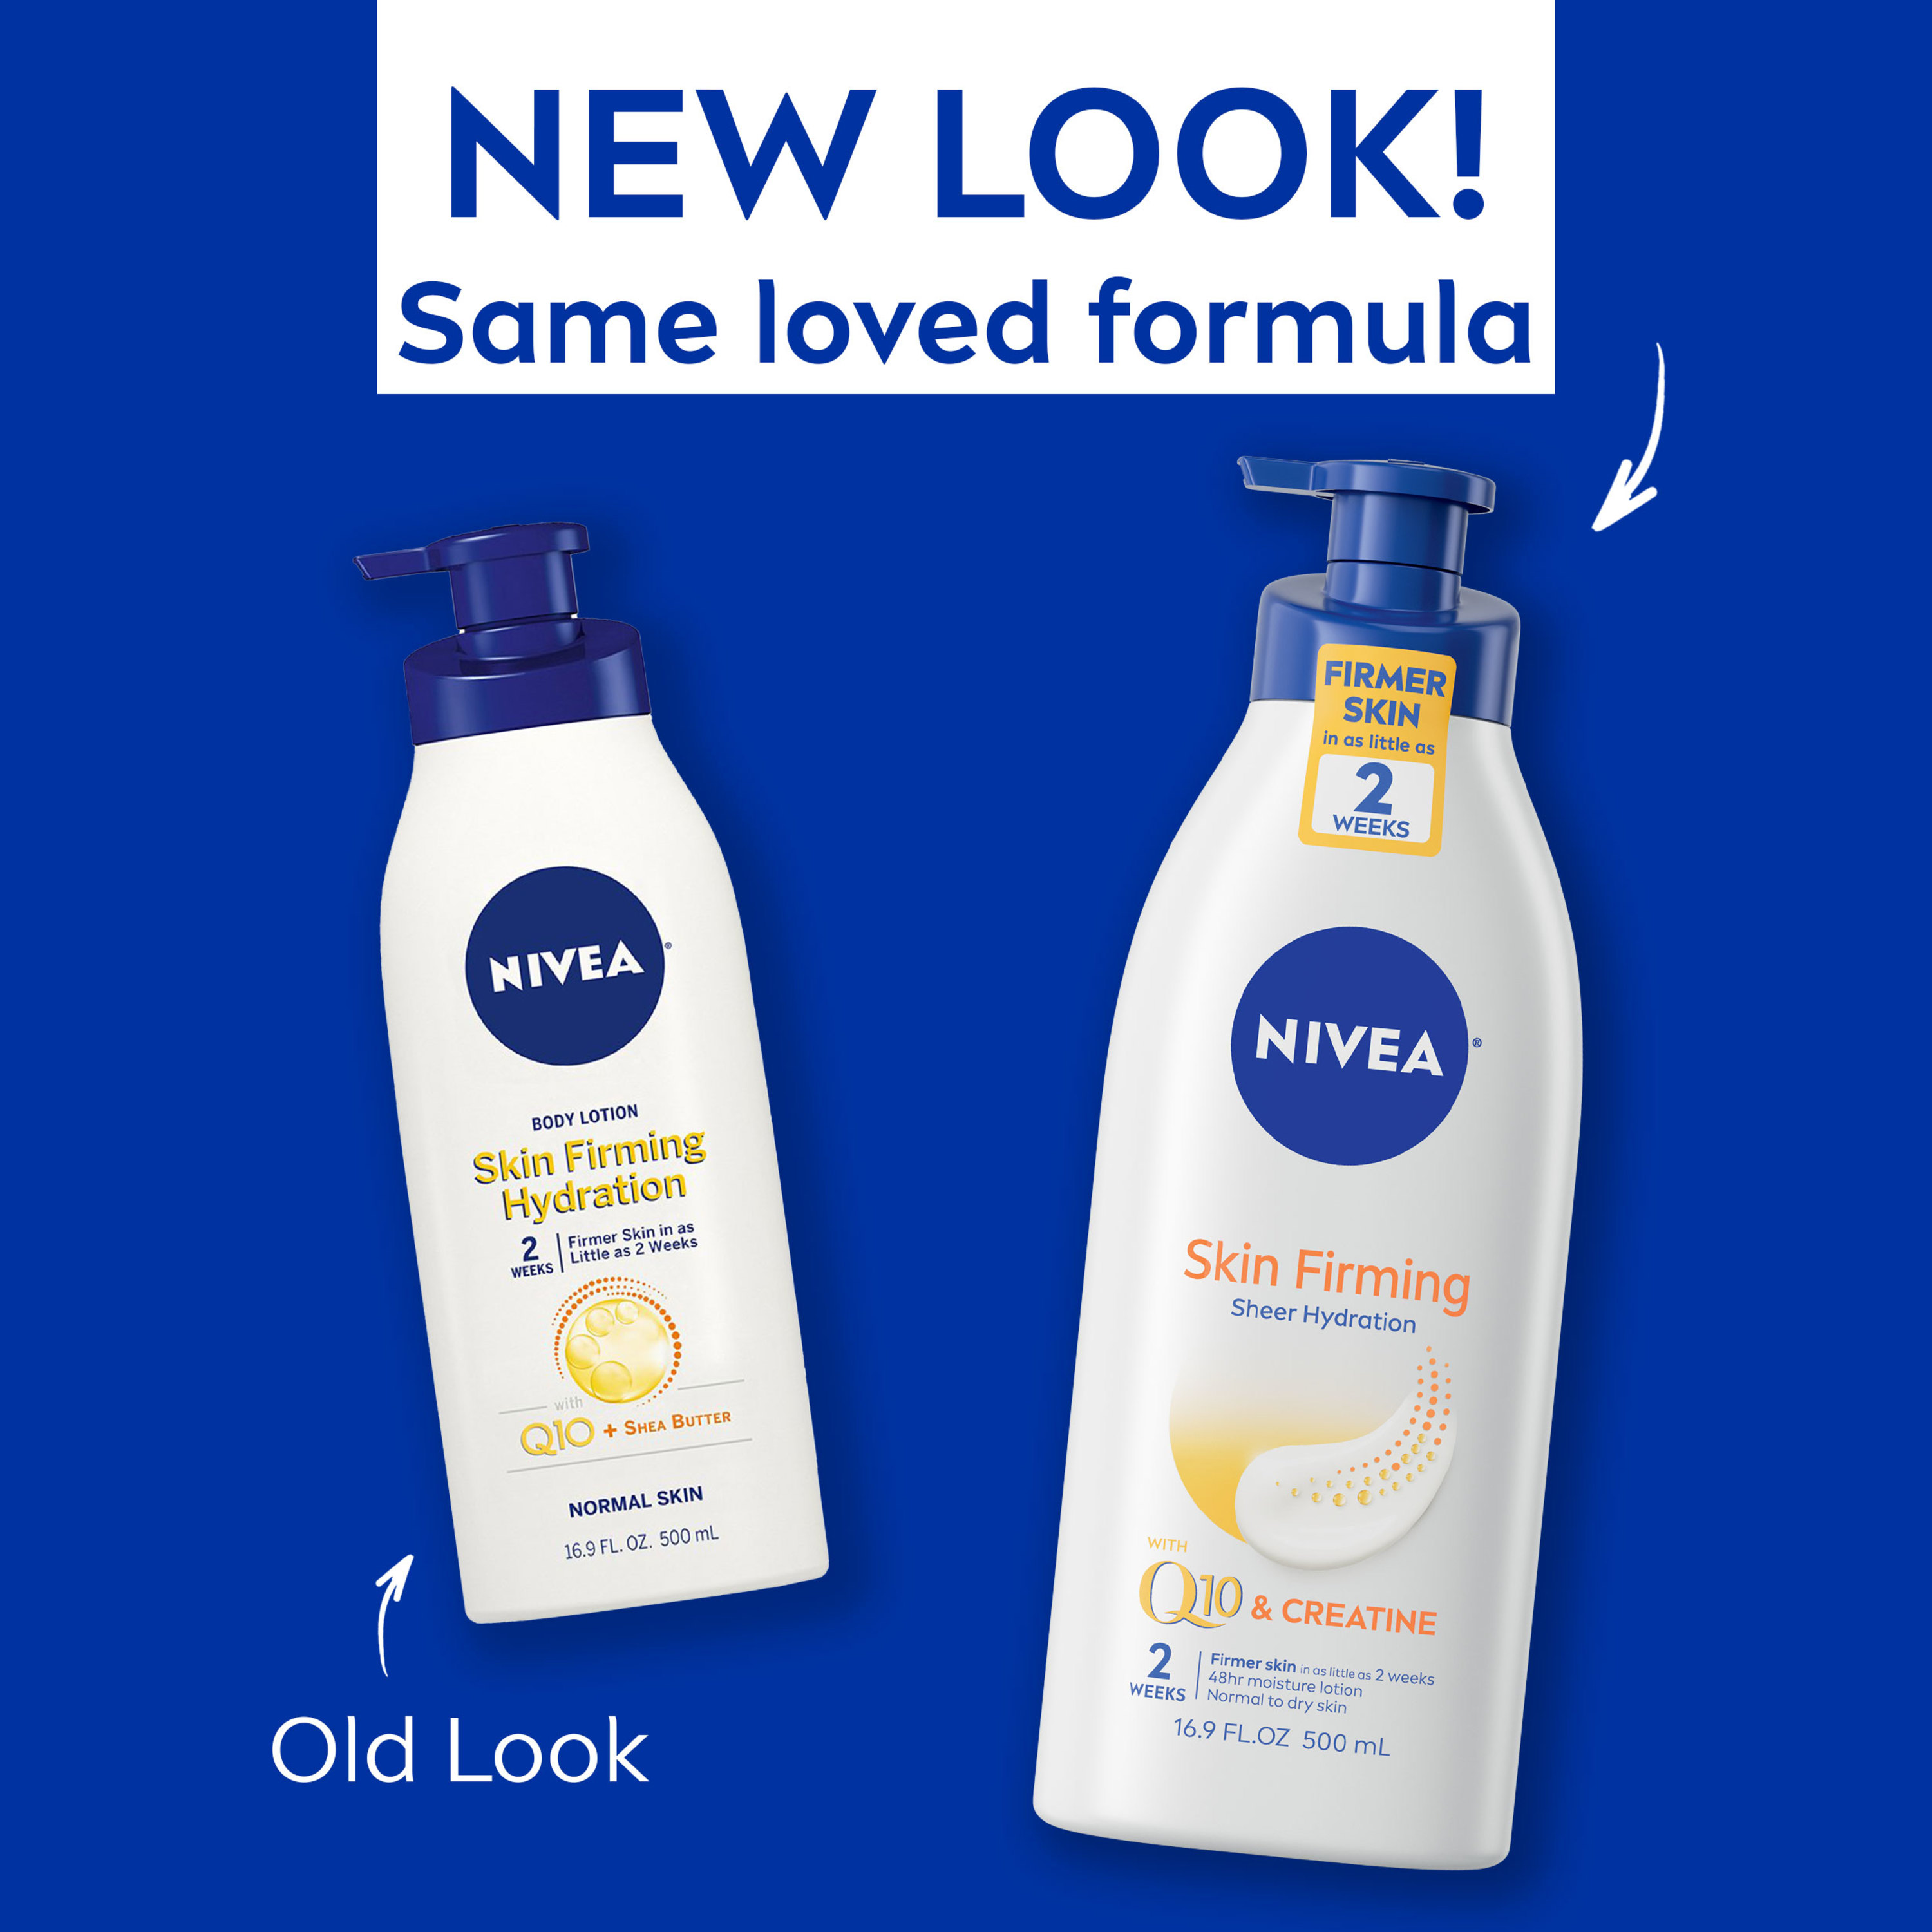 NIVEA Skin Firming Hydration Body Lotion with Q10 and Shea Butter, 16.9 Fl Oz Pump Bottle - image 3 of 12